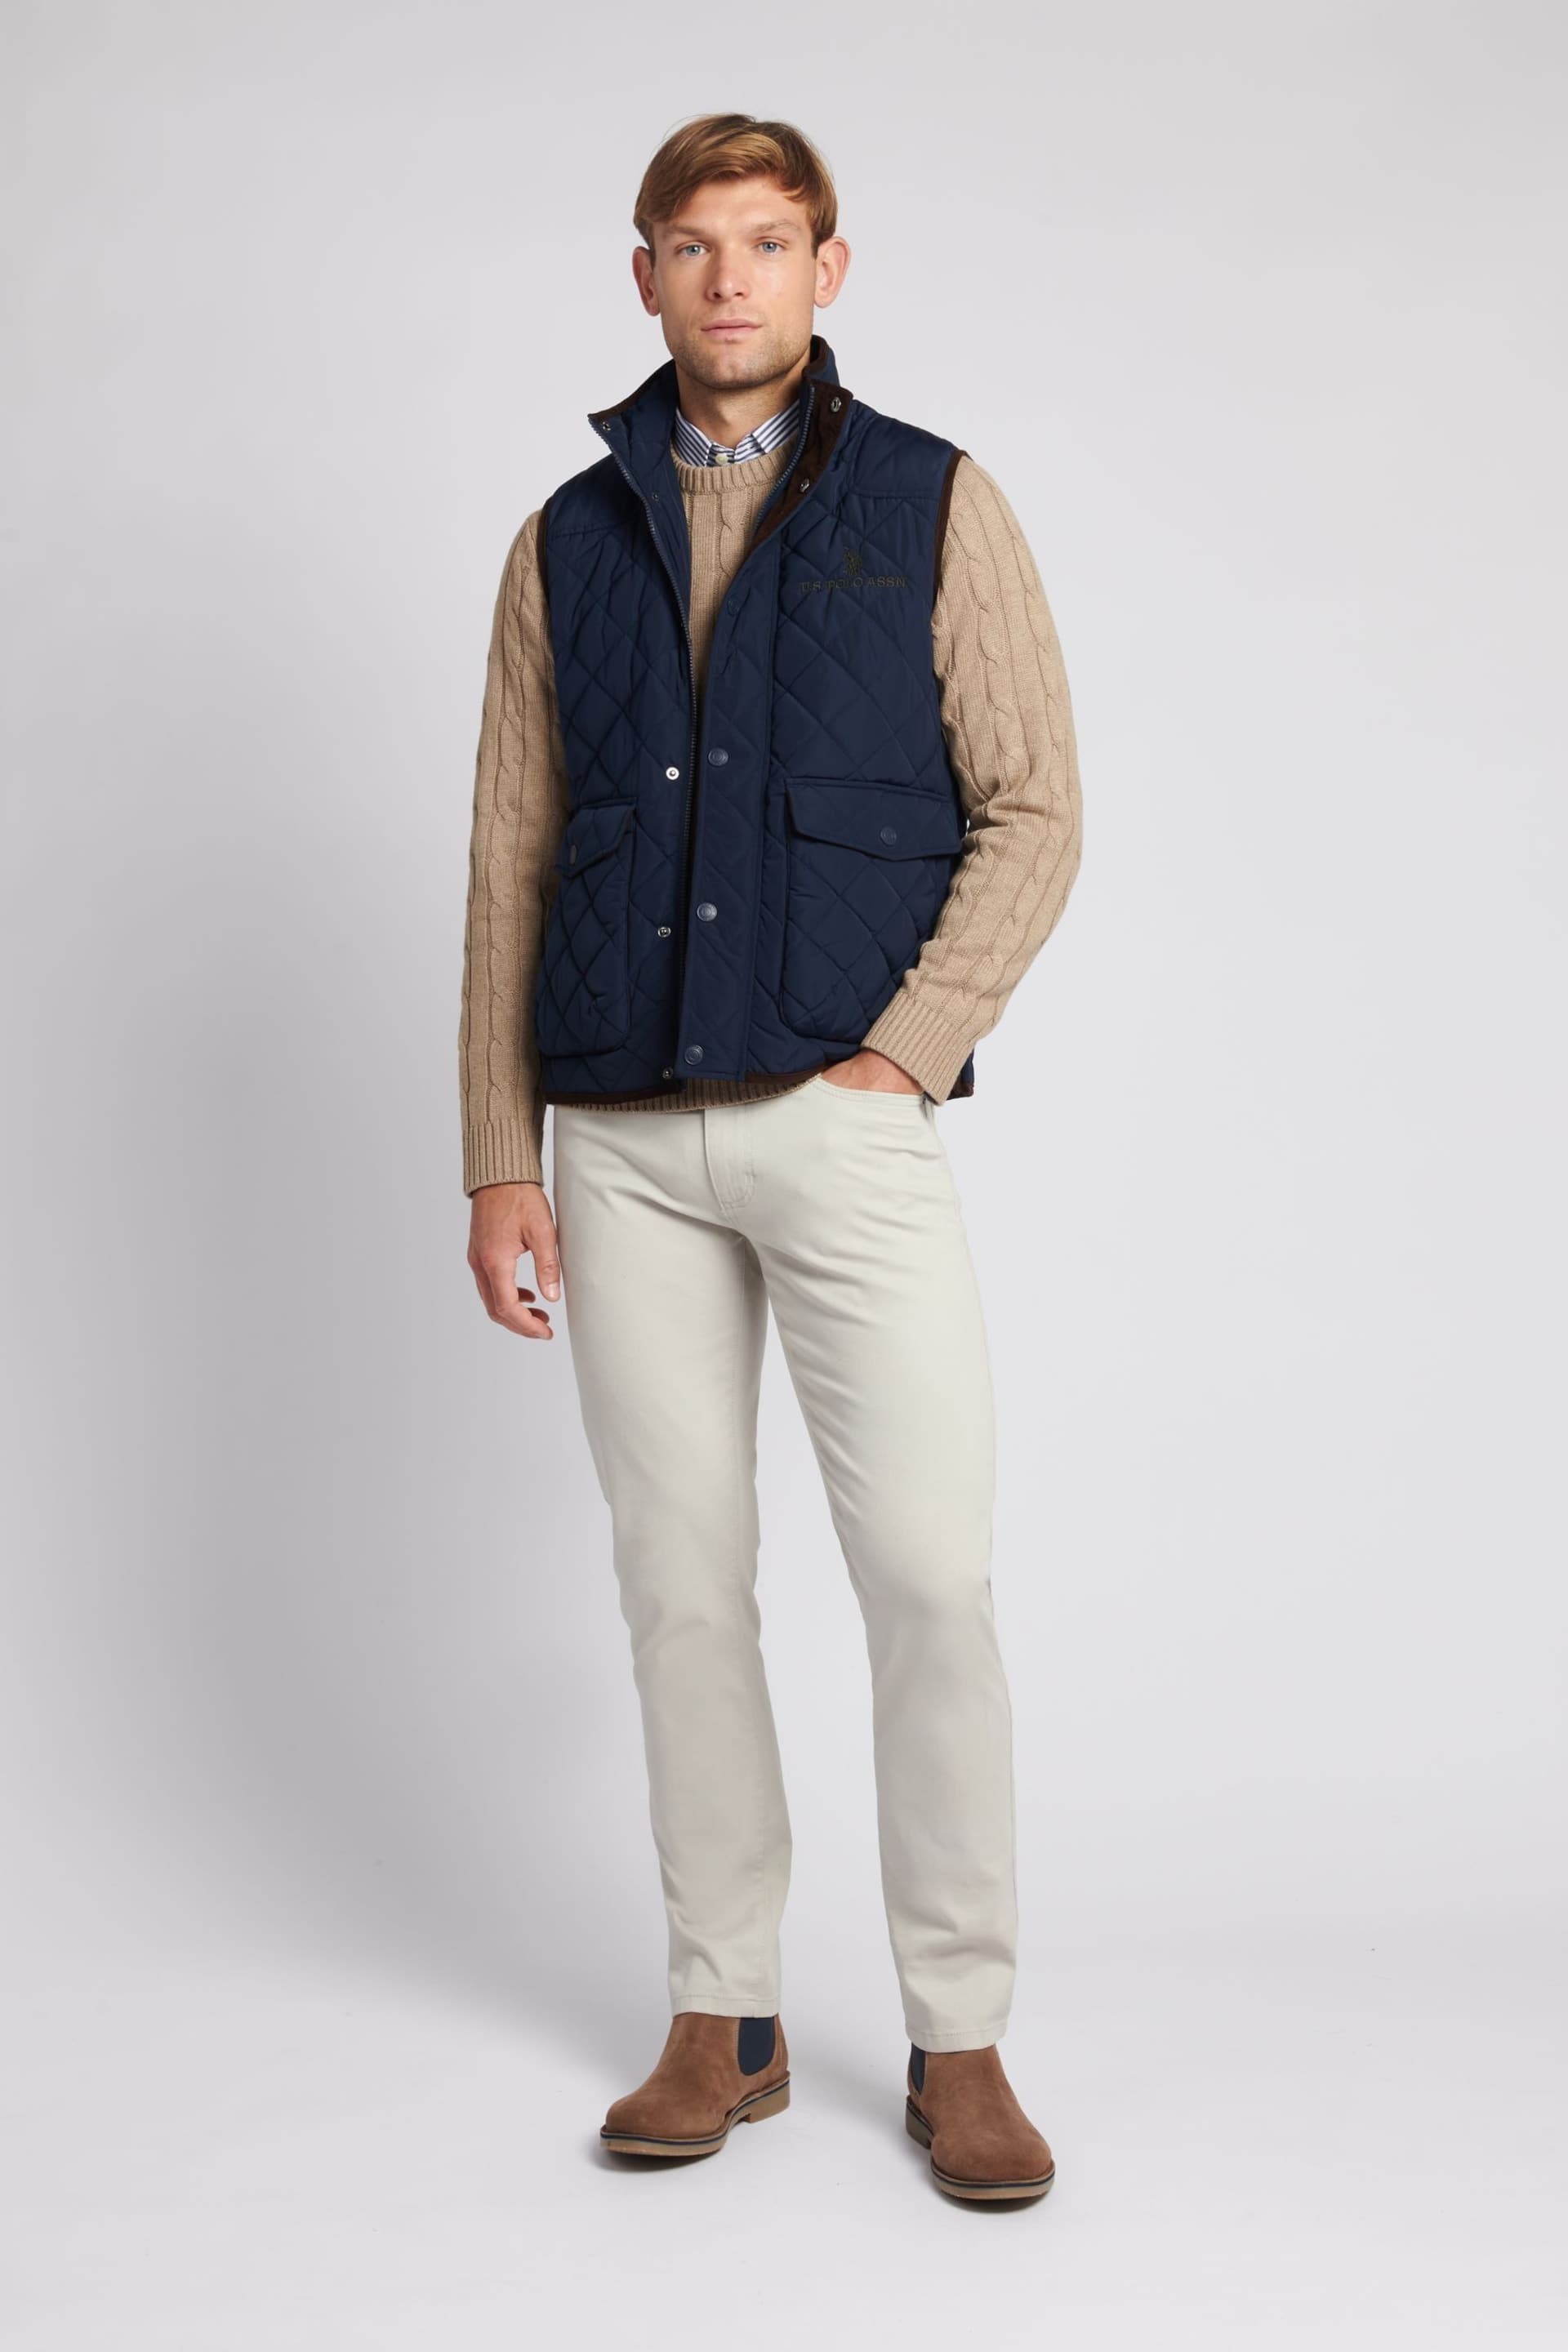 U.S. Polo Assn. Mens Blue Quilted Hacking Gilet - Image 3 of 8